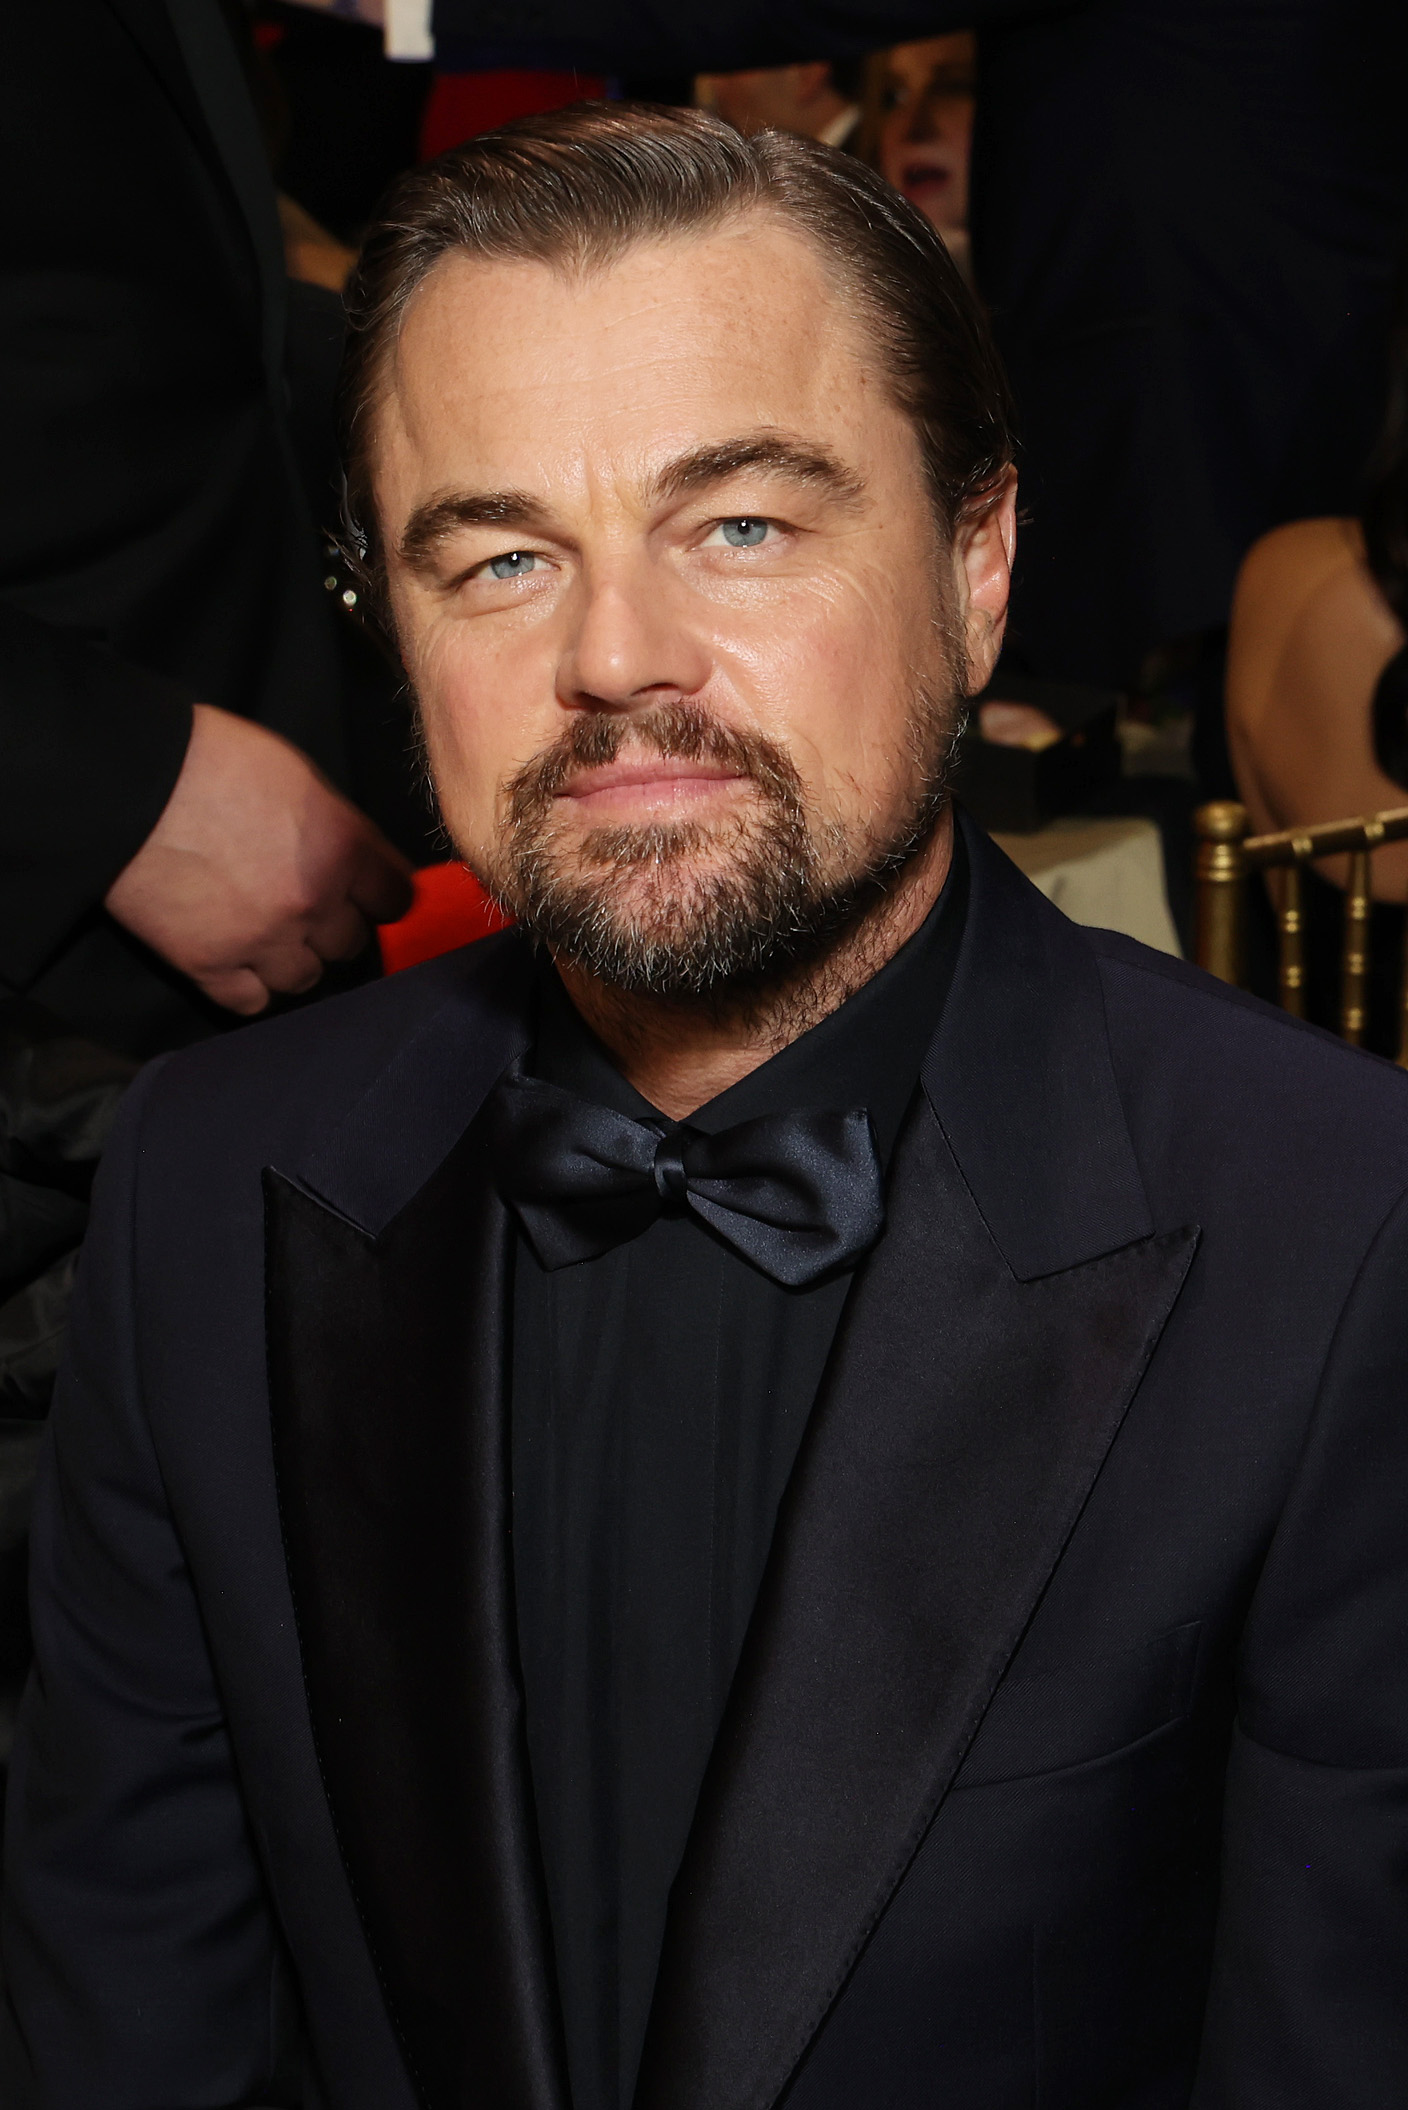 Leonardo DiCaprio at the 29th Annual Critics Choice Awards | Source: Getty Images